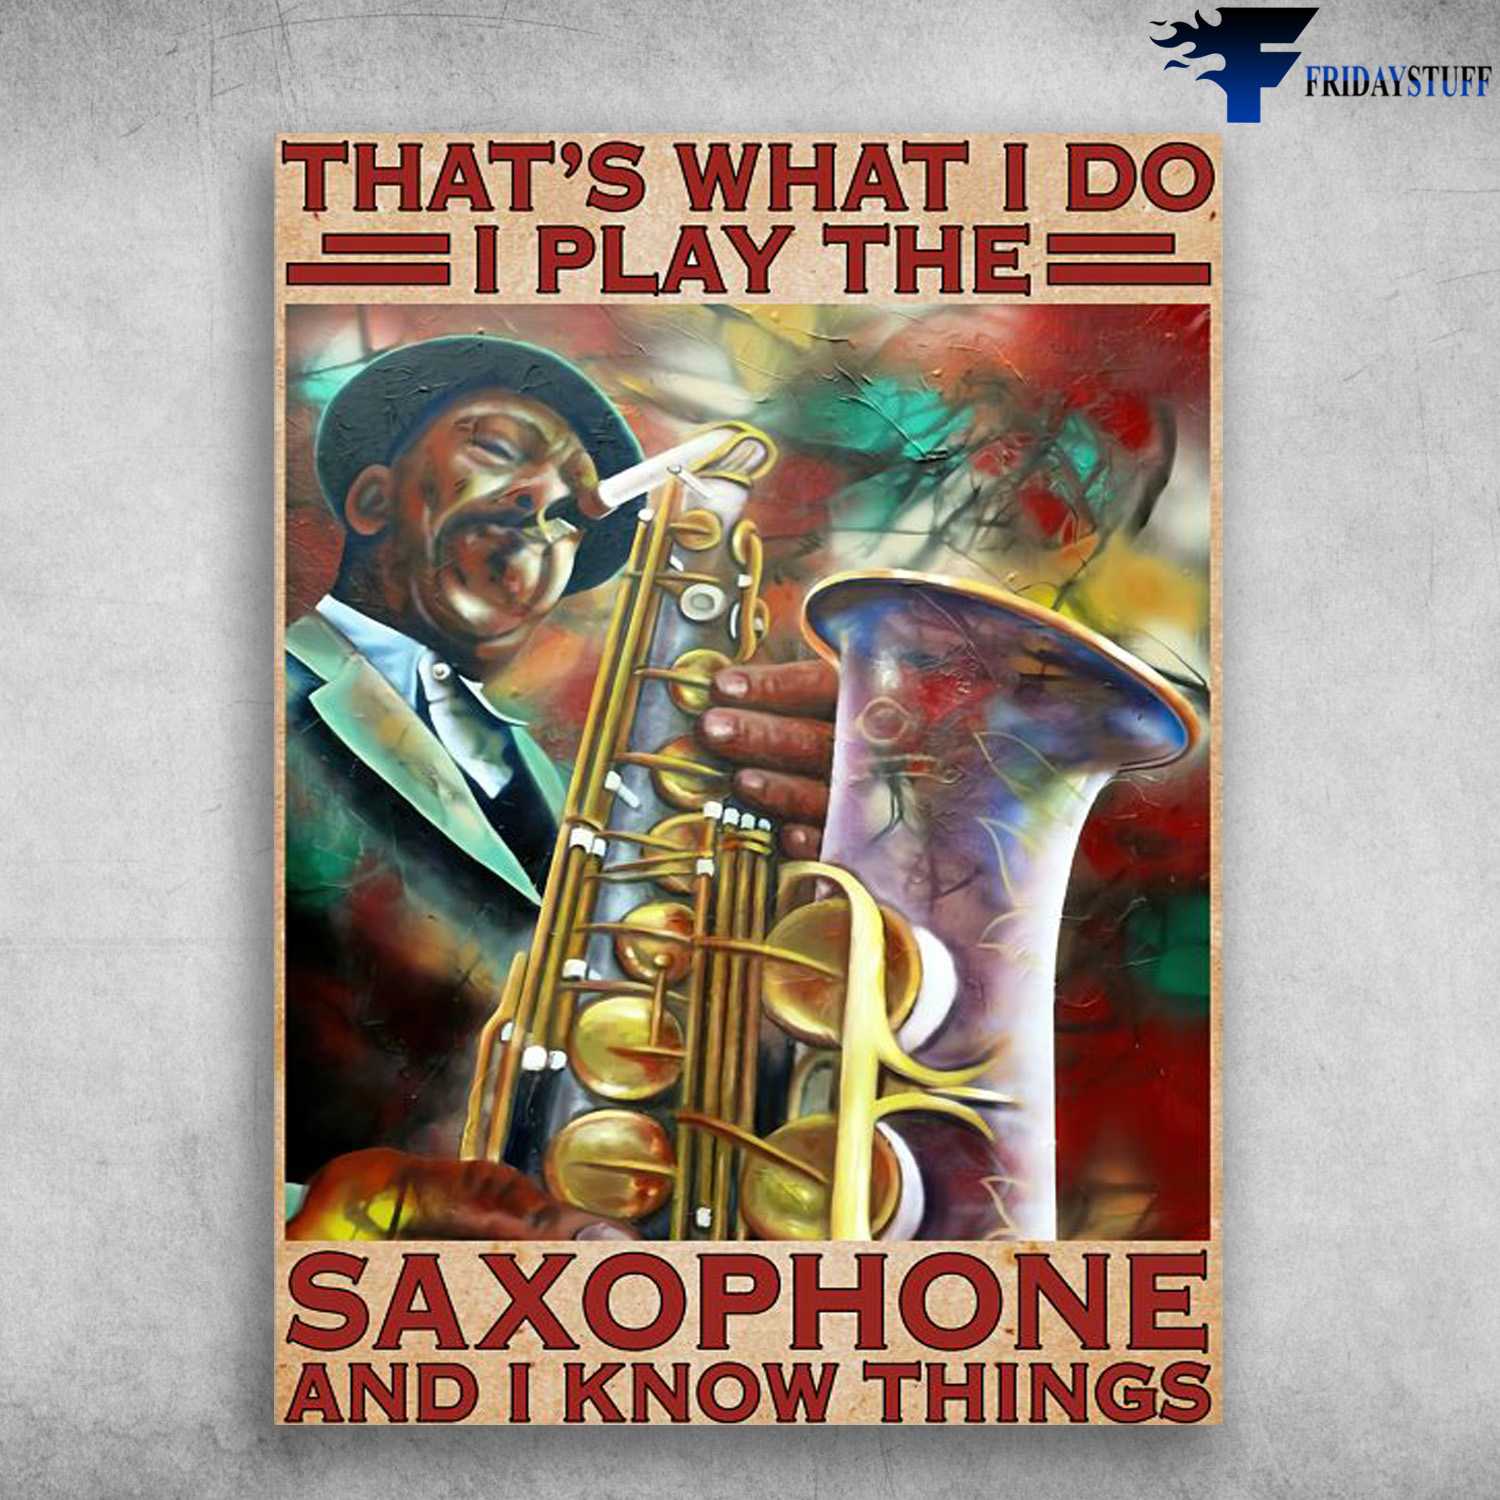 Saxophone Man, Saxophone Lover, That's What I Do, I Play The Saxophone, And I Know Things